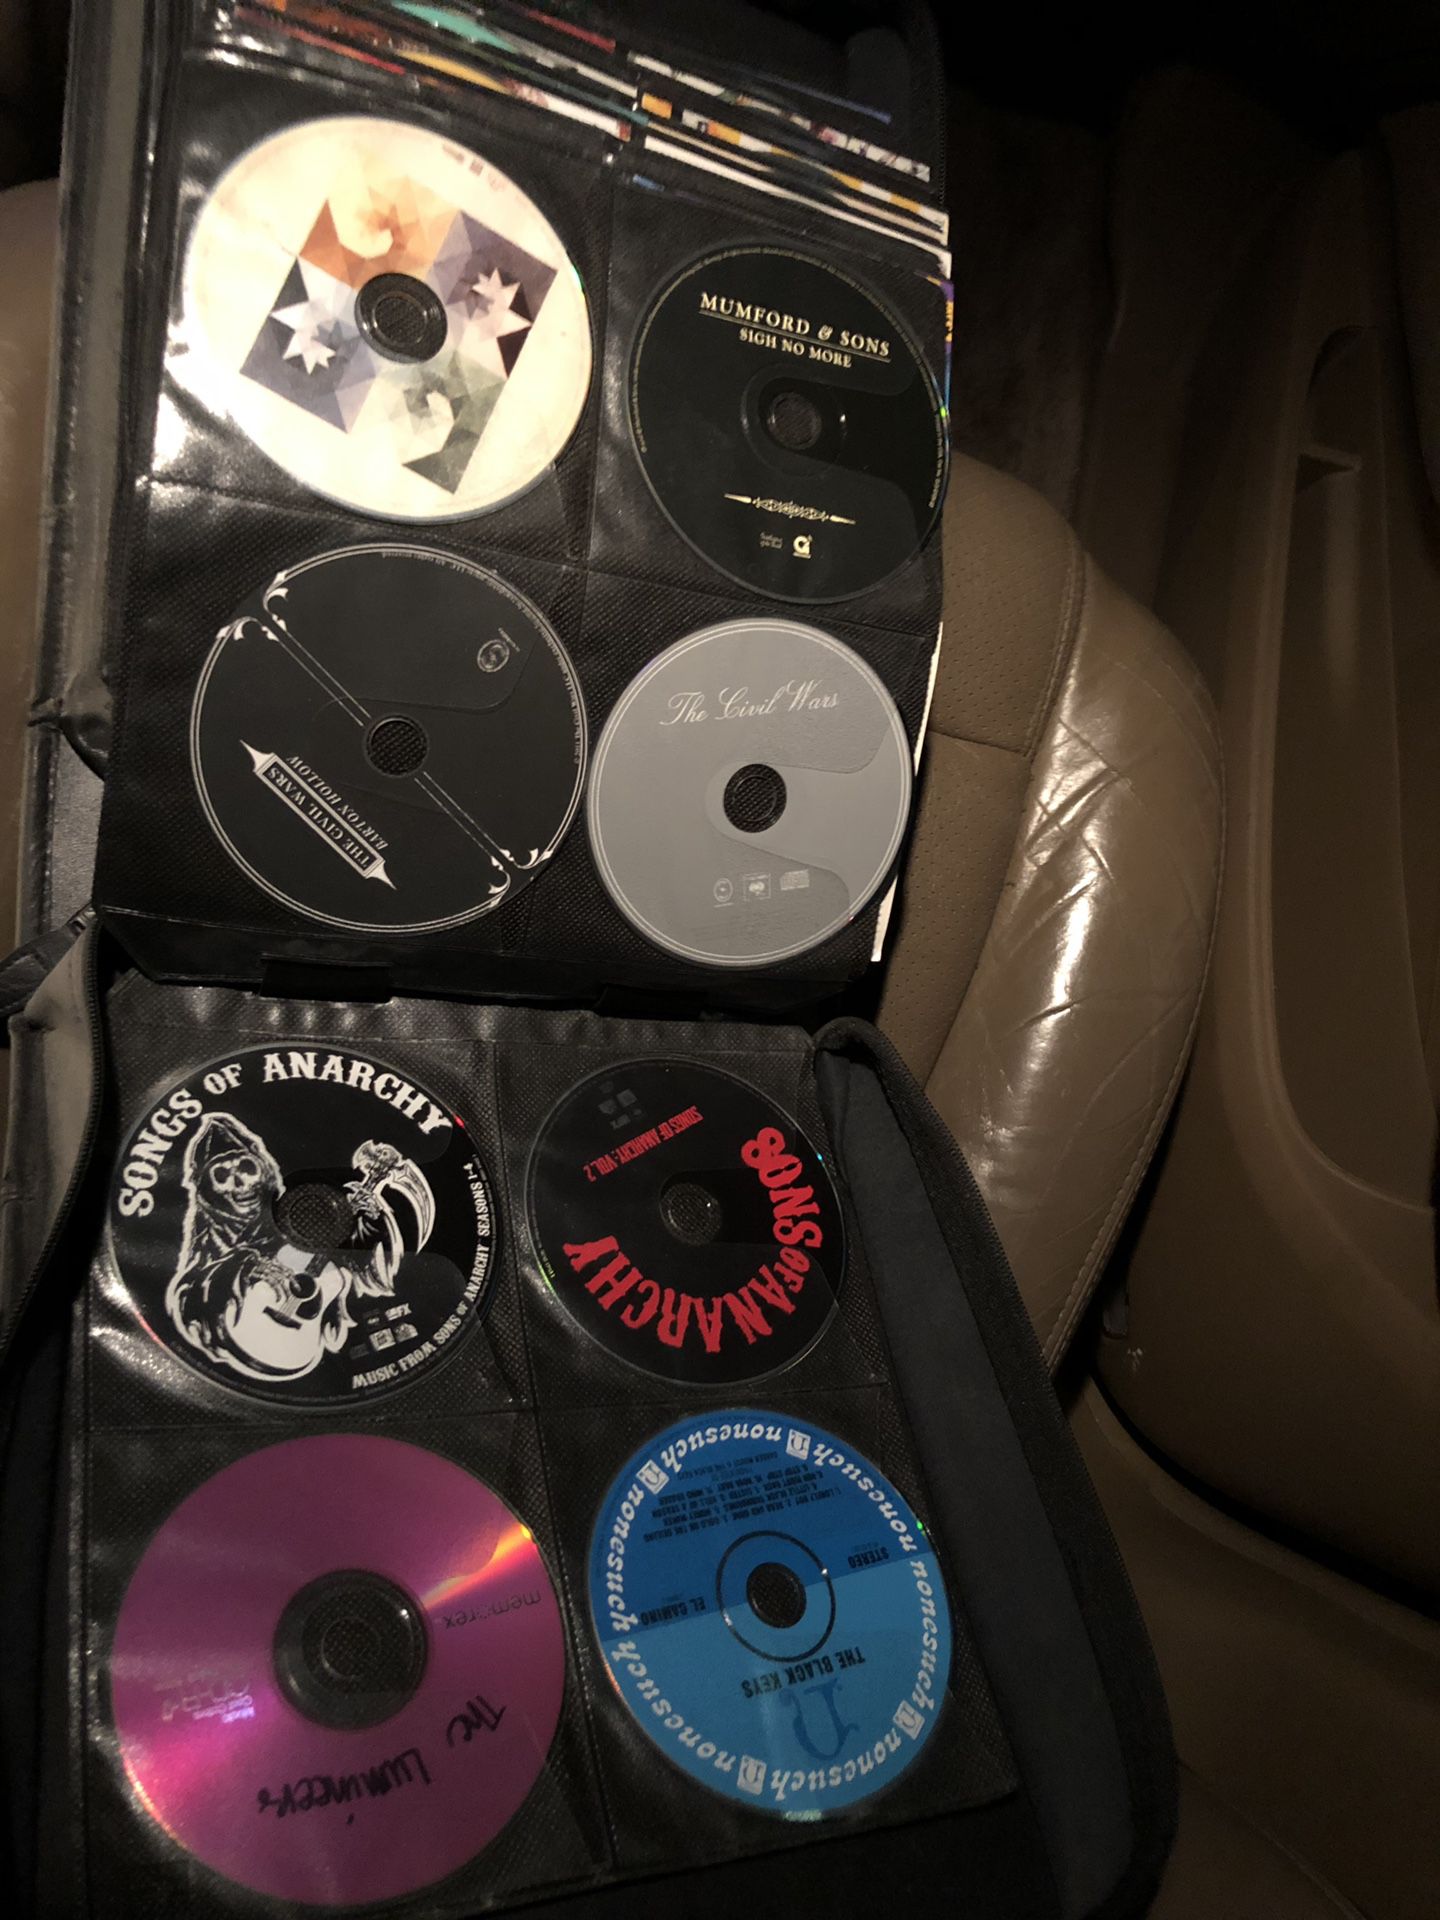 Large CD case with all the classics